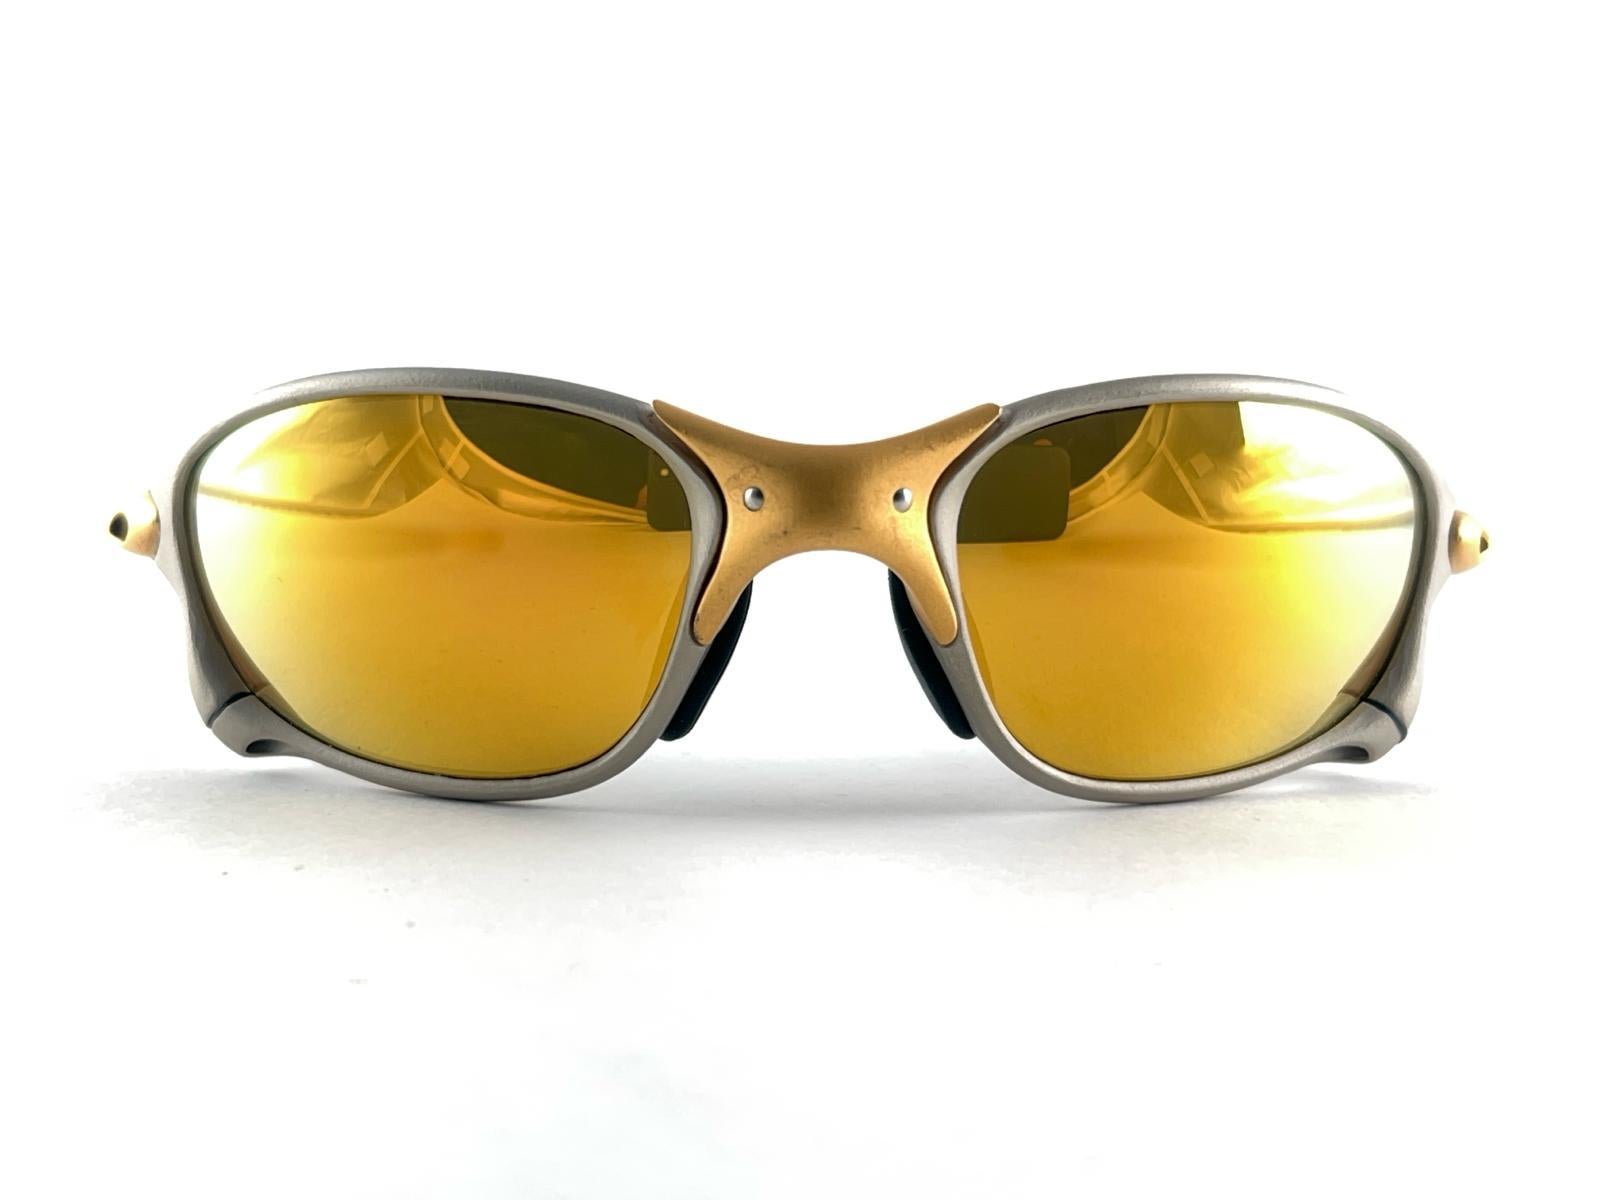 
New &  rare Vintage Oakley XX Sunglasses. 
Wrap sports frame with 24 K gold iridium lenses.
New never worn or displayed. This item might show minor sign of wear due to storage.
Comes with its original box as pictured.
Made in Usa